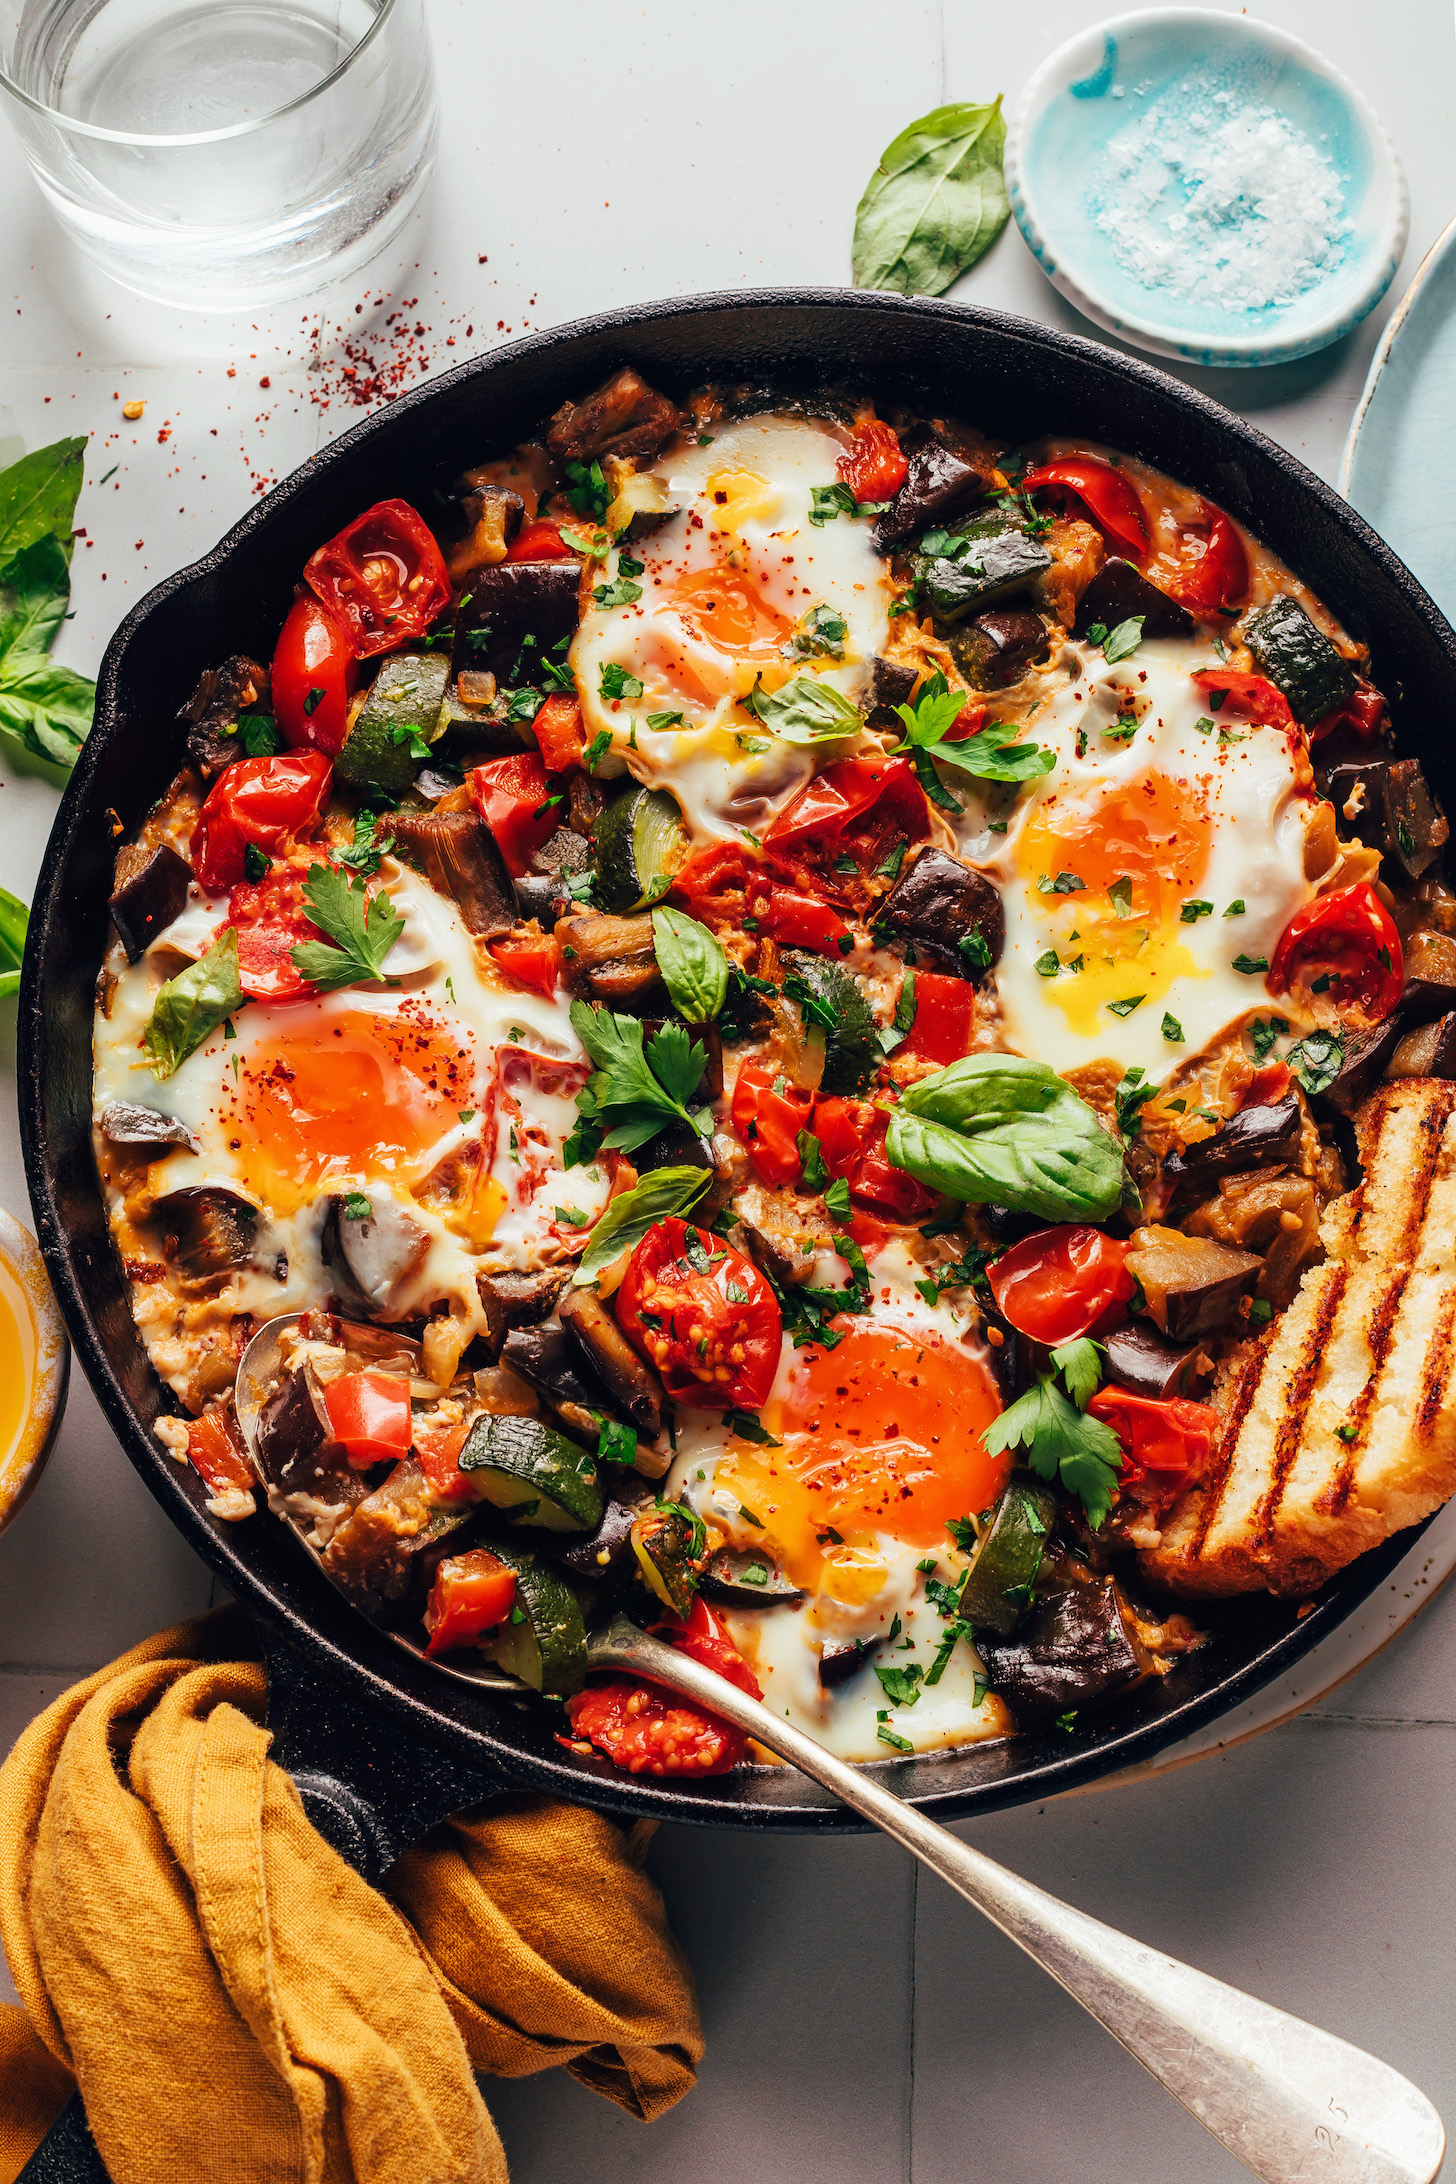 Spoon and slice of toasted bread resting in a pan of skillet ratatouille and eggs